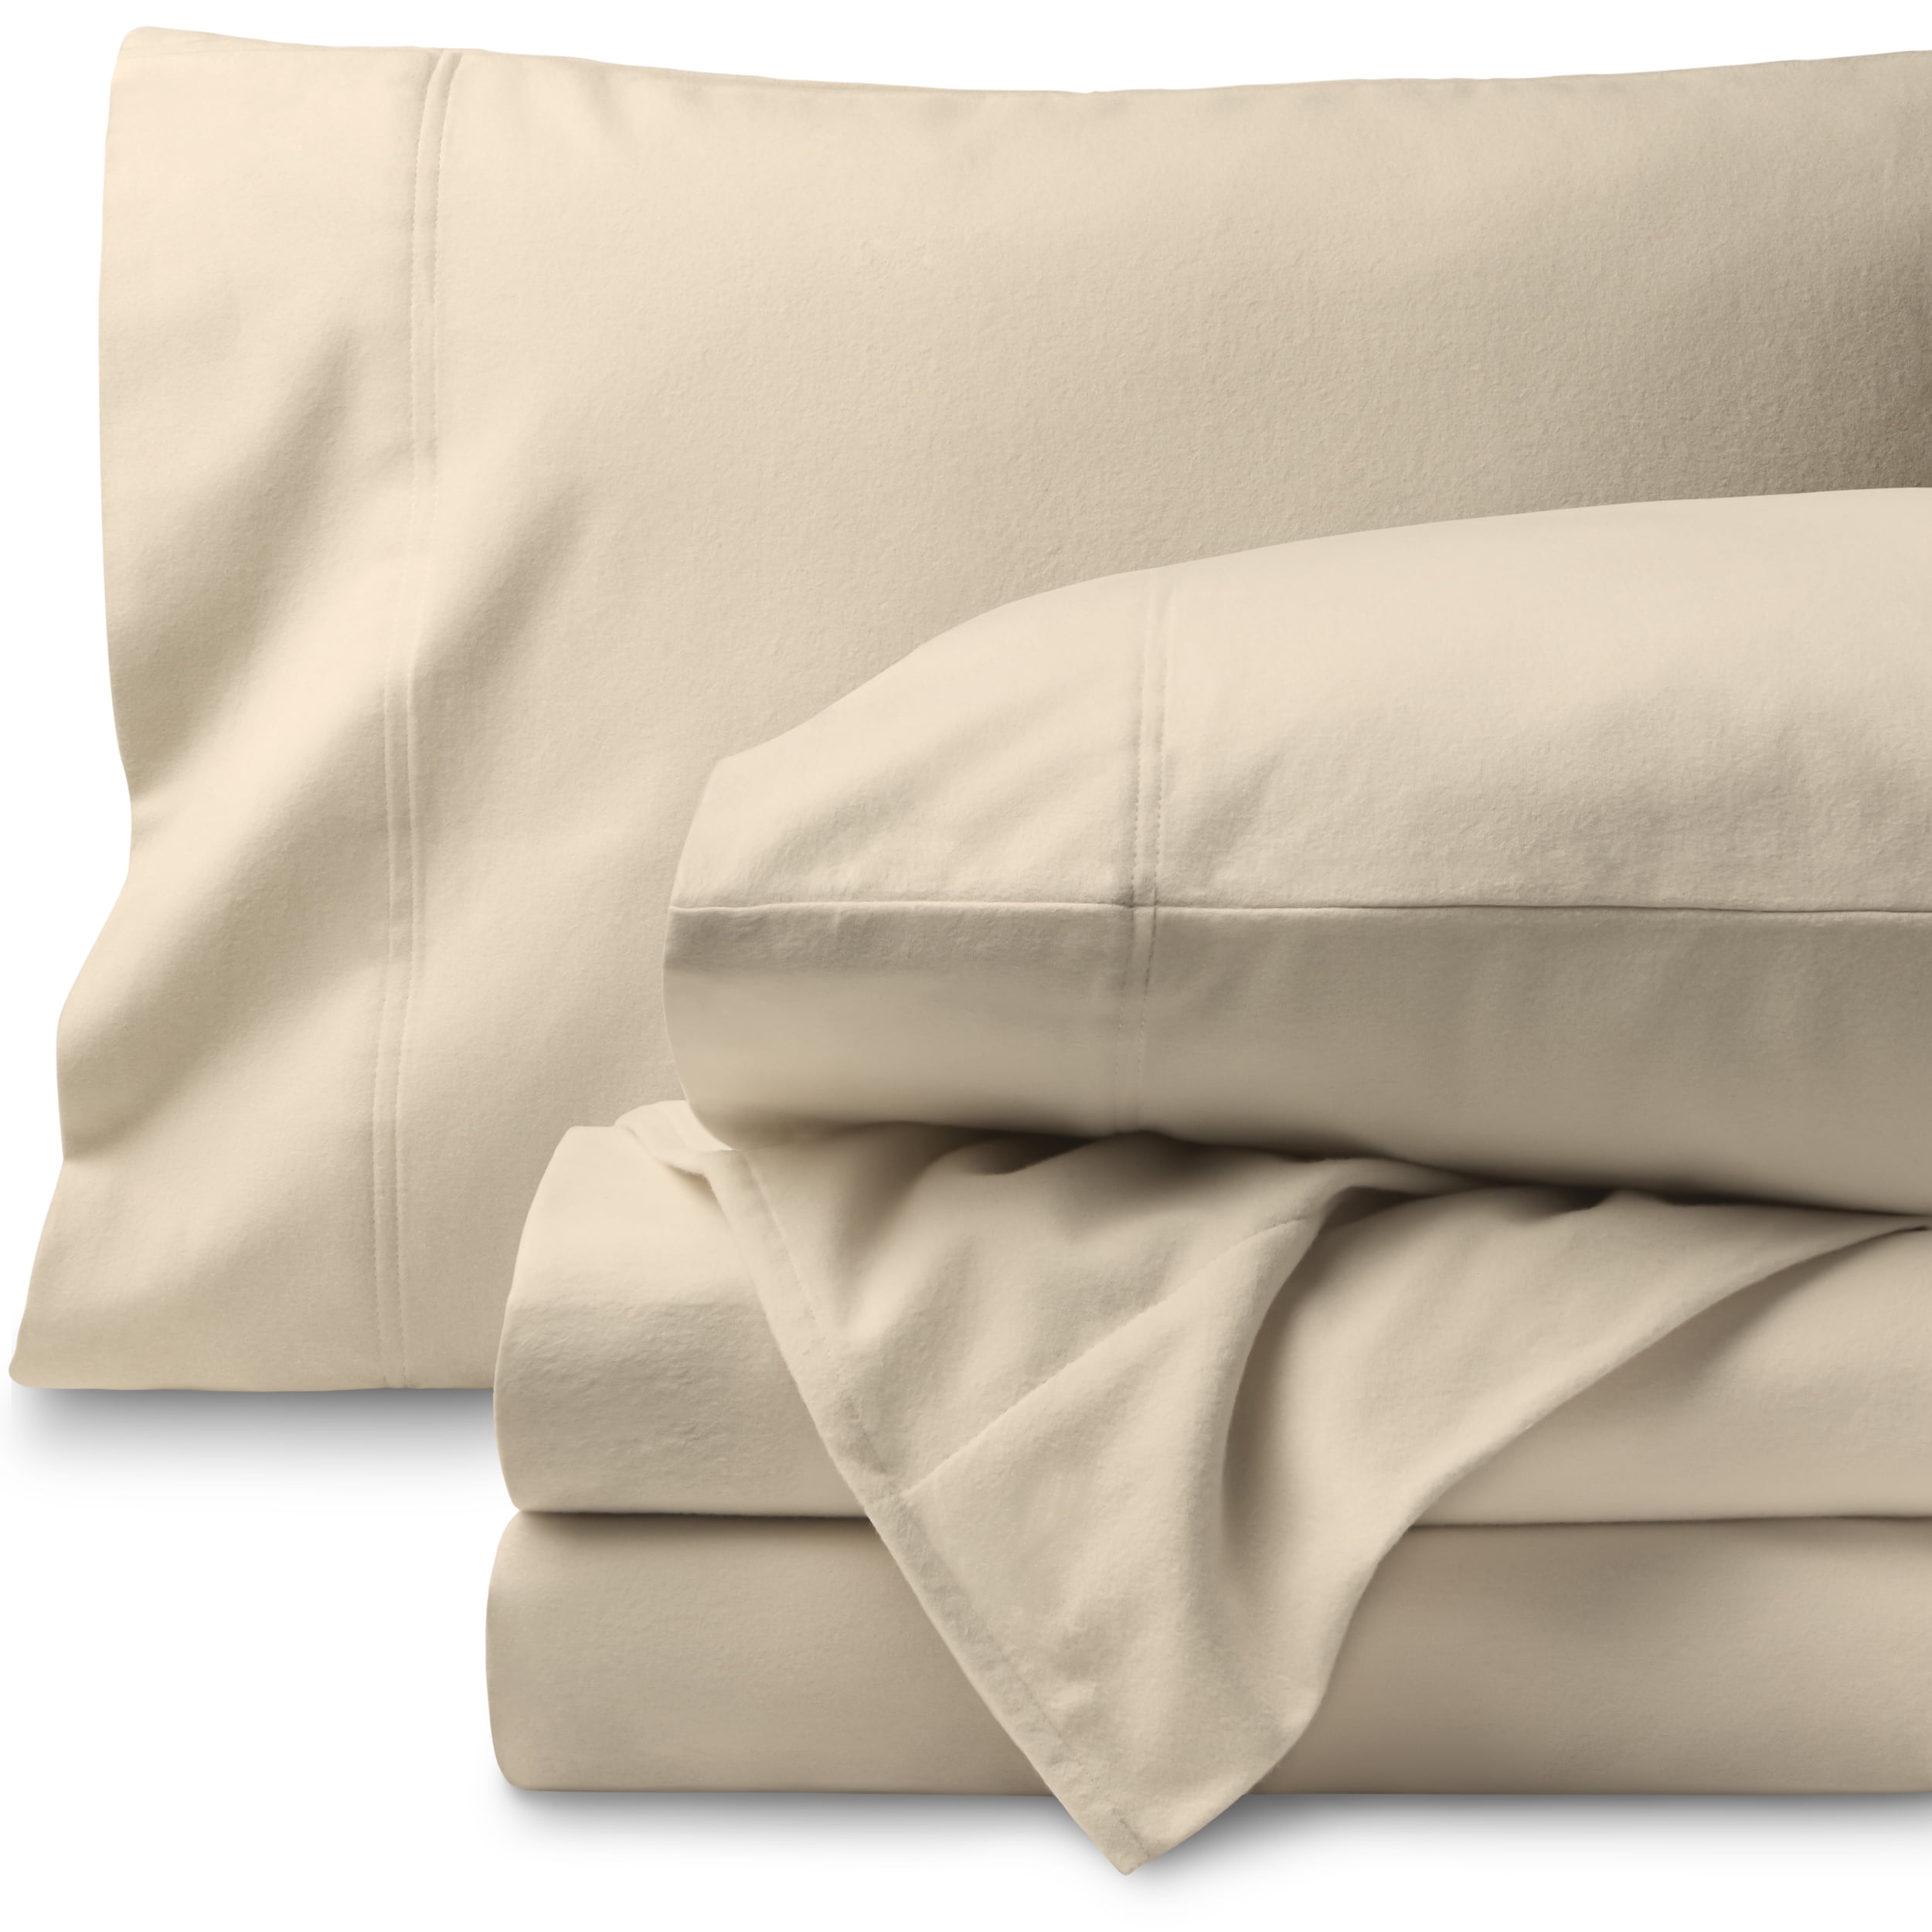 Double Brushed Flannel Bare Home Standard Flannel Pillowcase Set Standard Pillowcase Set of 2, White 100/% Cotton Velvety Soft Heavyweight